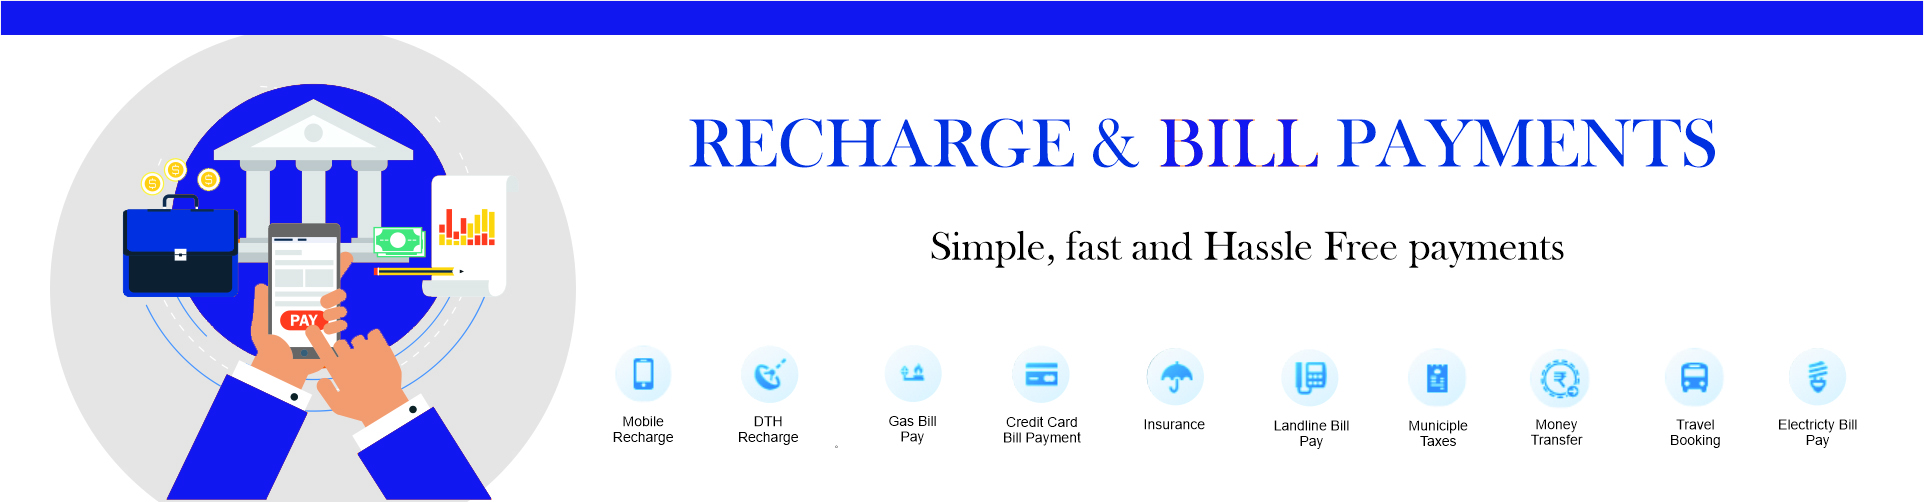 Recharge & Bill Payment